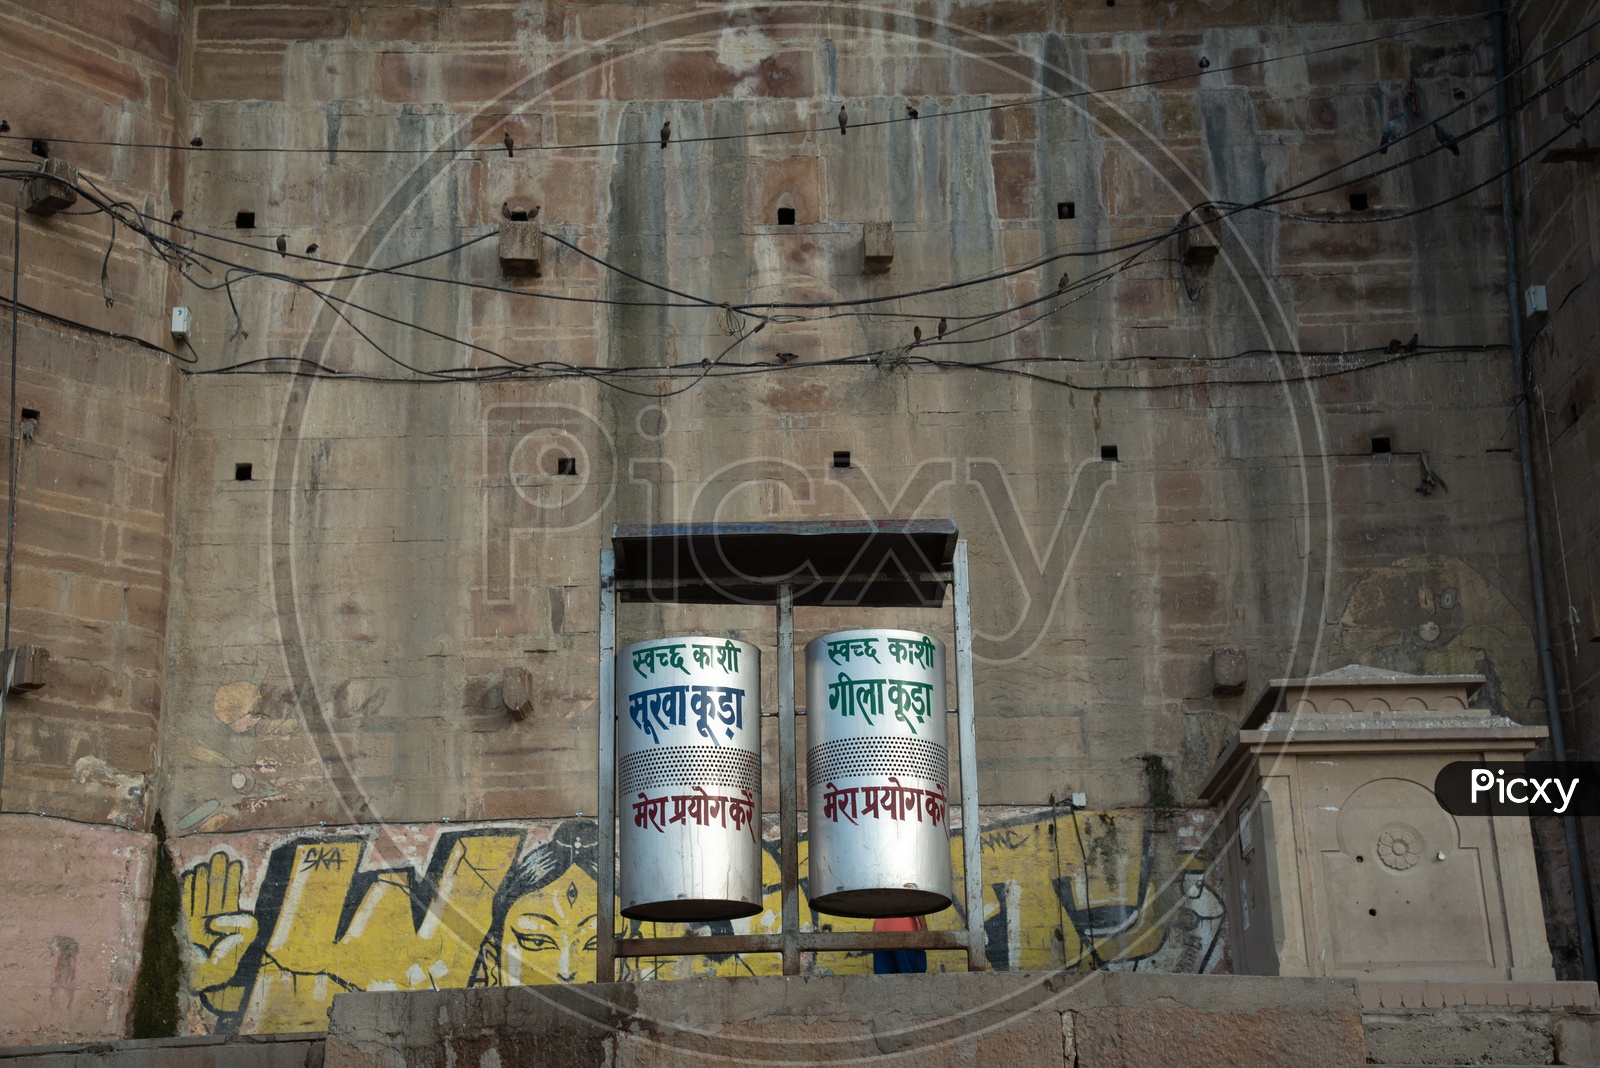 Dry Waste  And  Wet Waste  Collecting Dustbins On Ganga River Ghats In Varanasi